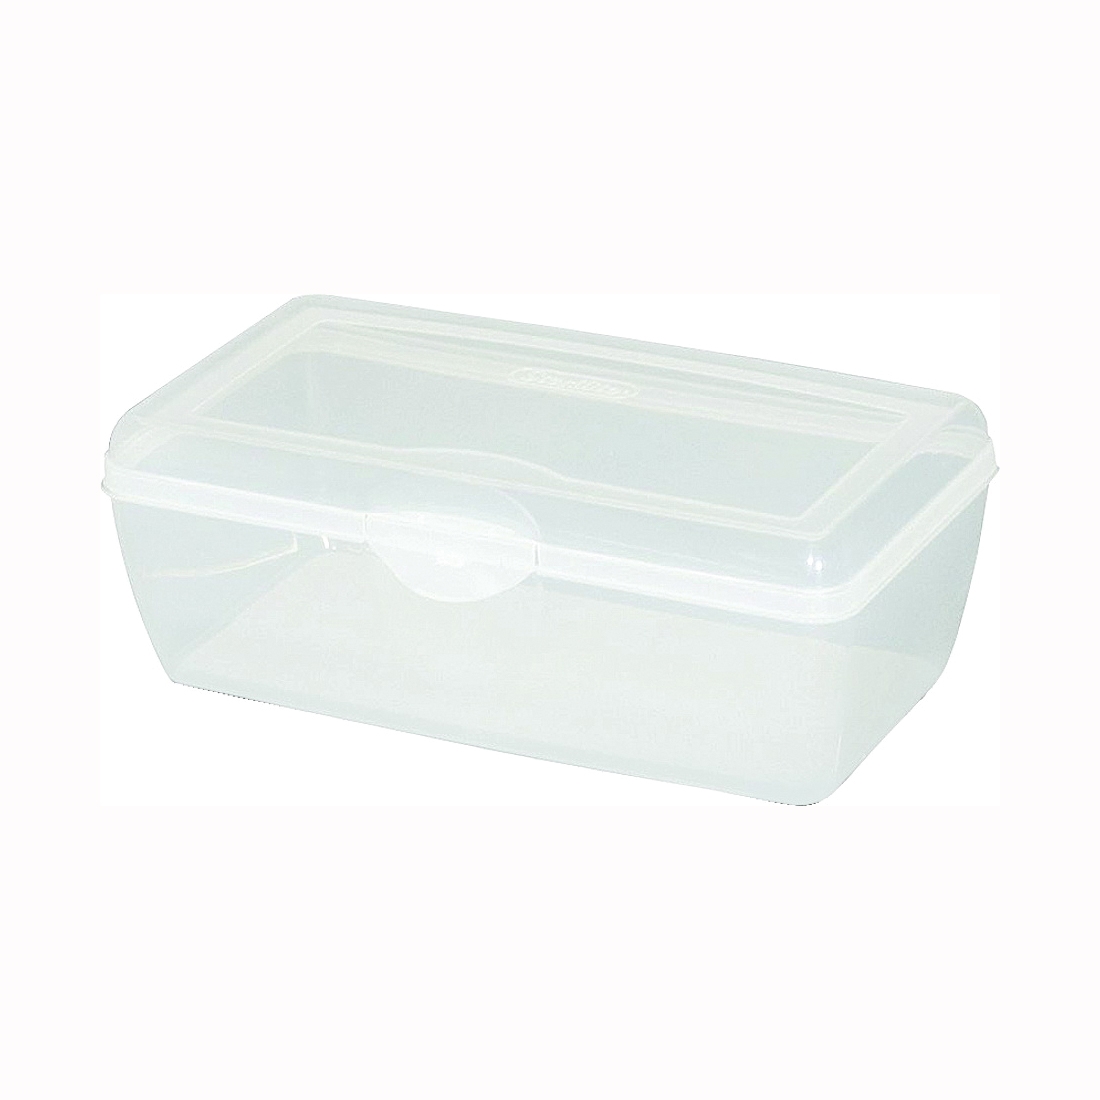 Rubbermaid Cleverstore Clear 71 Qt Plastic Storage Tote w/ trays